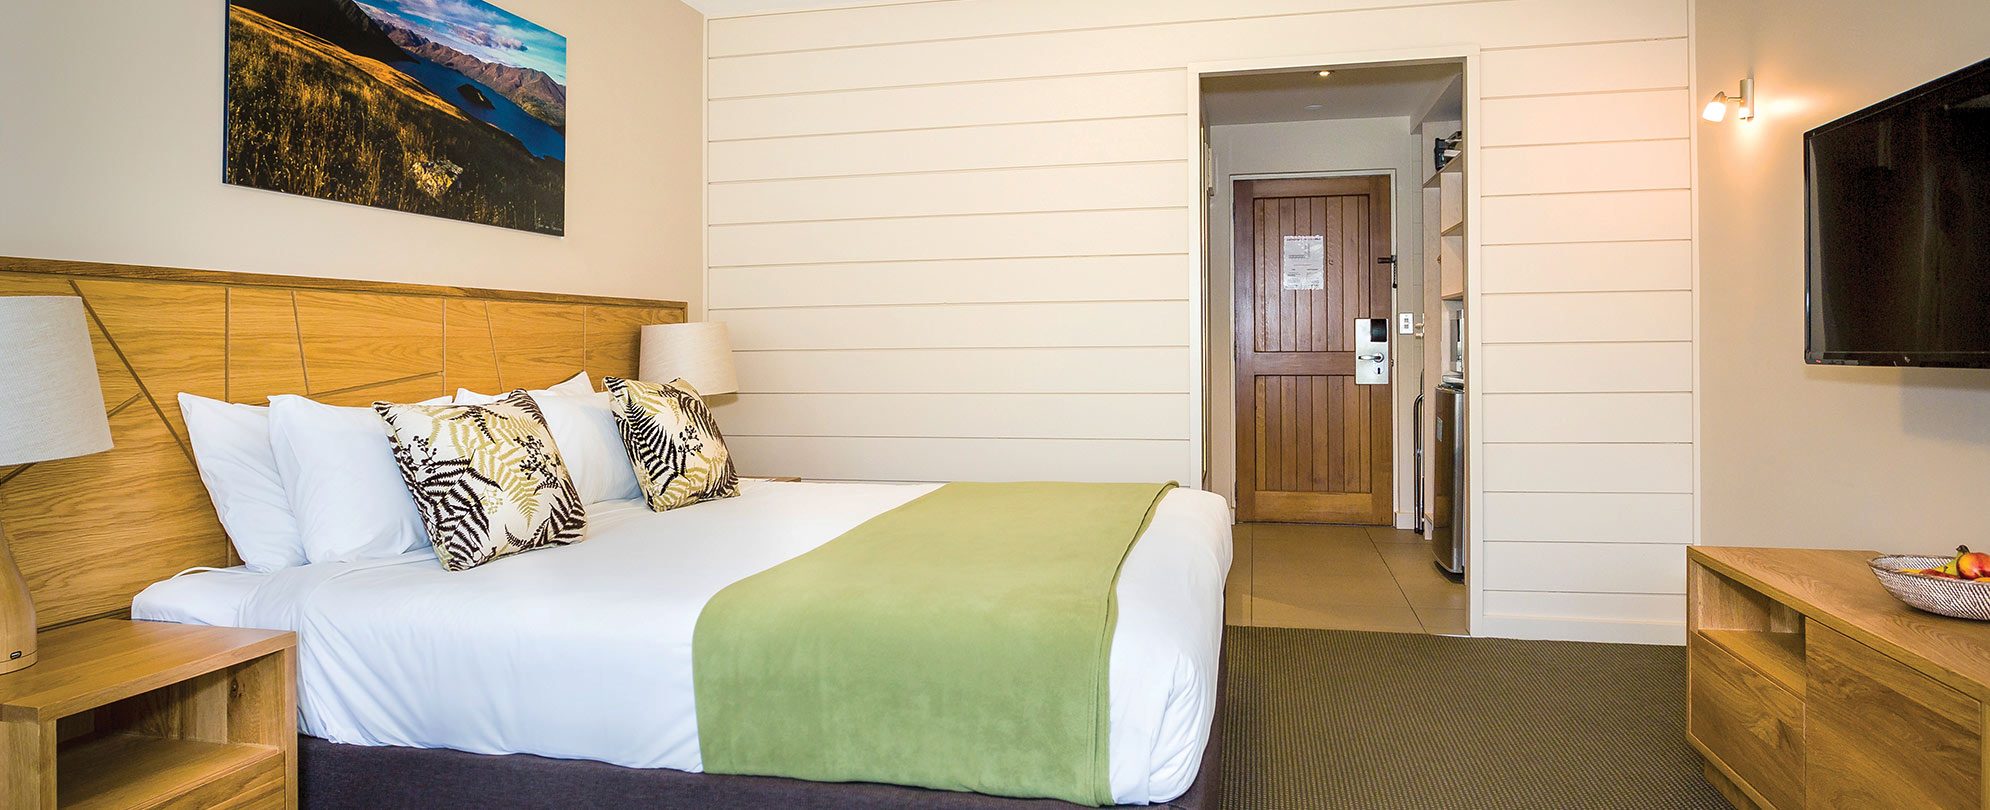 The bedroom of a standard suite at Club Wyndham Wanaka.